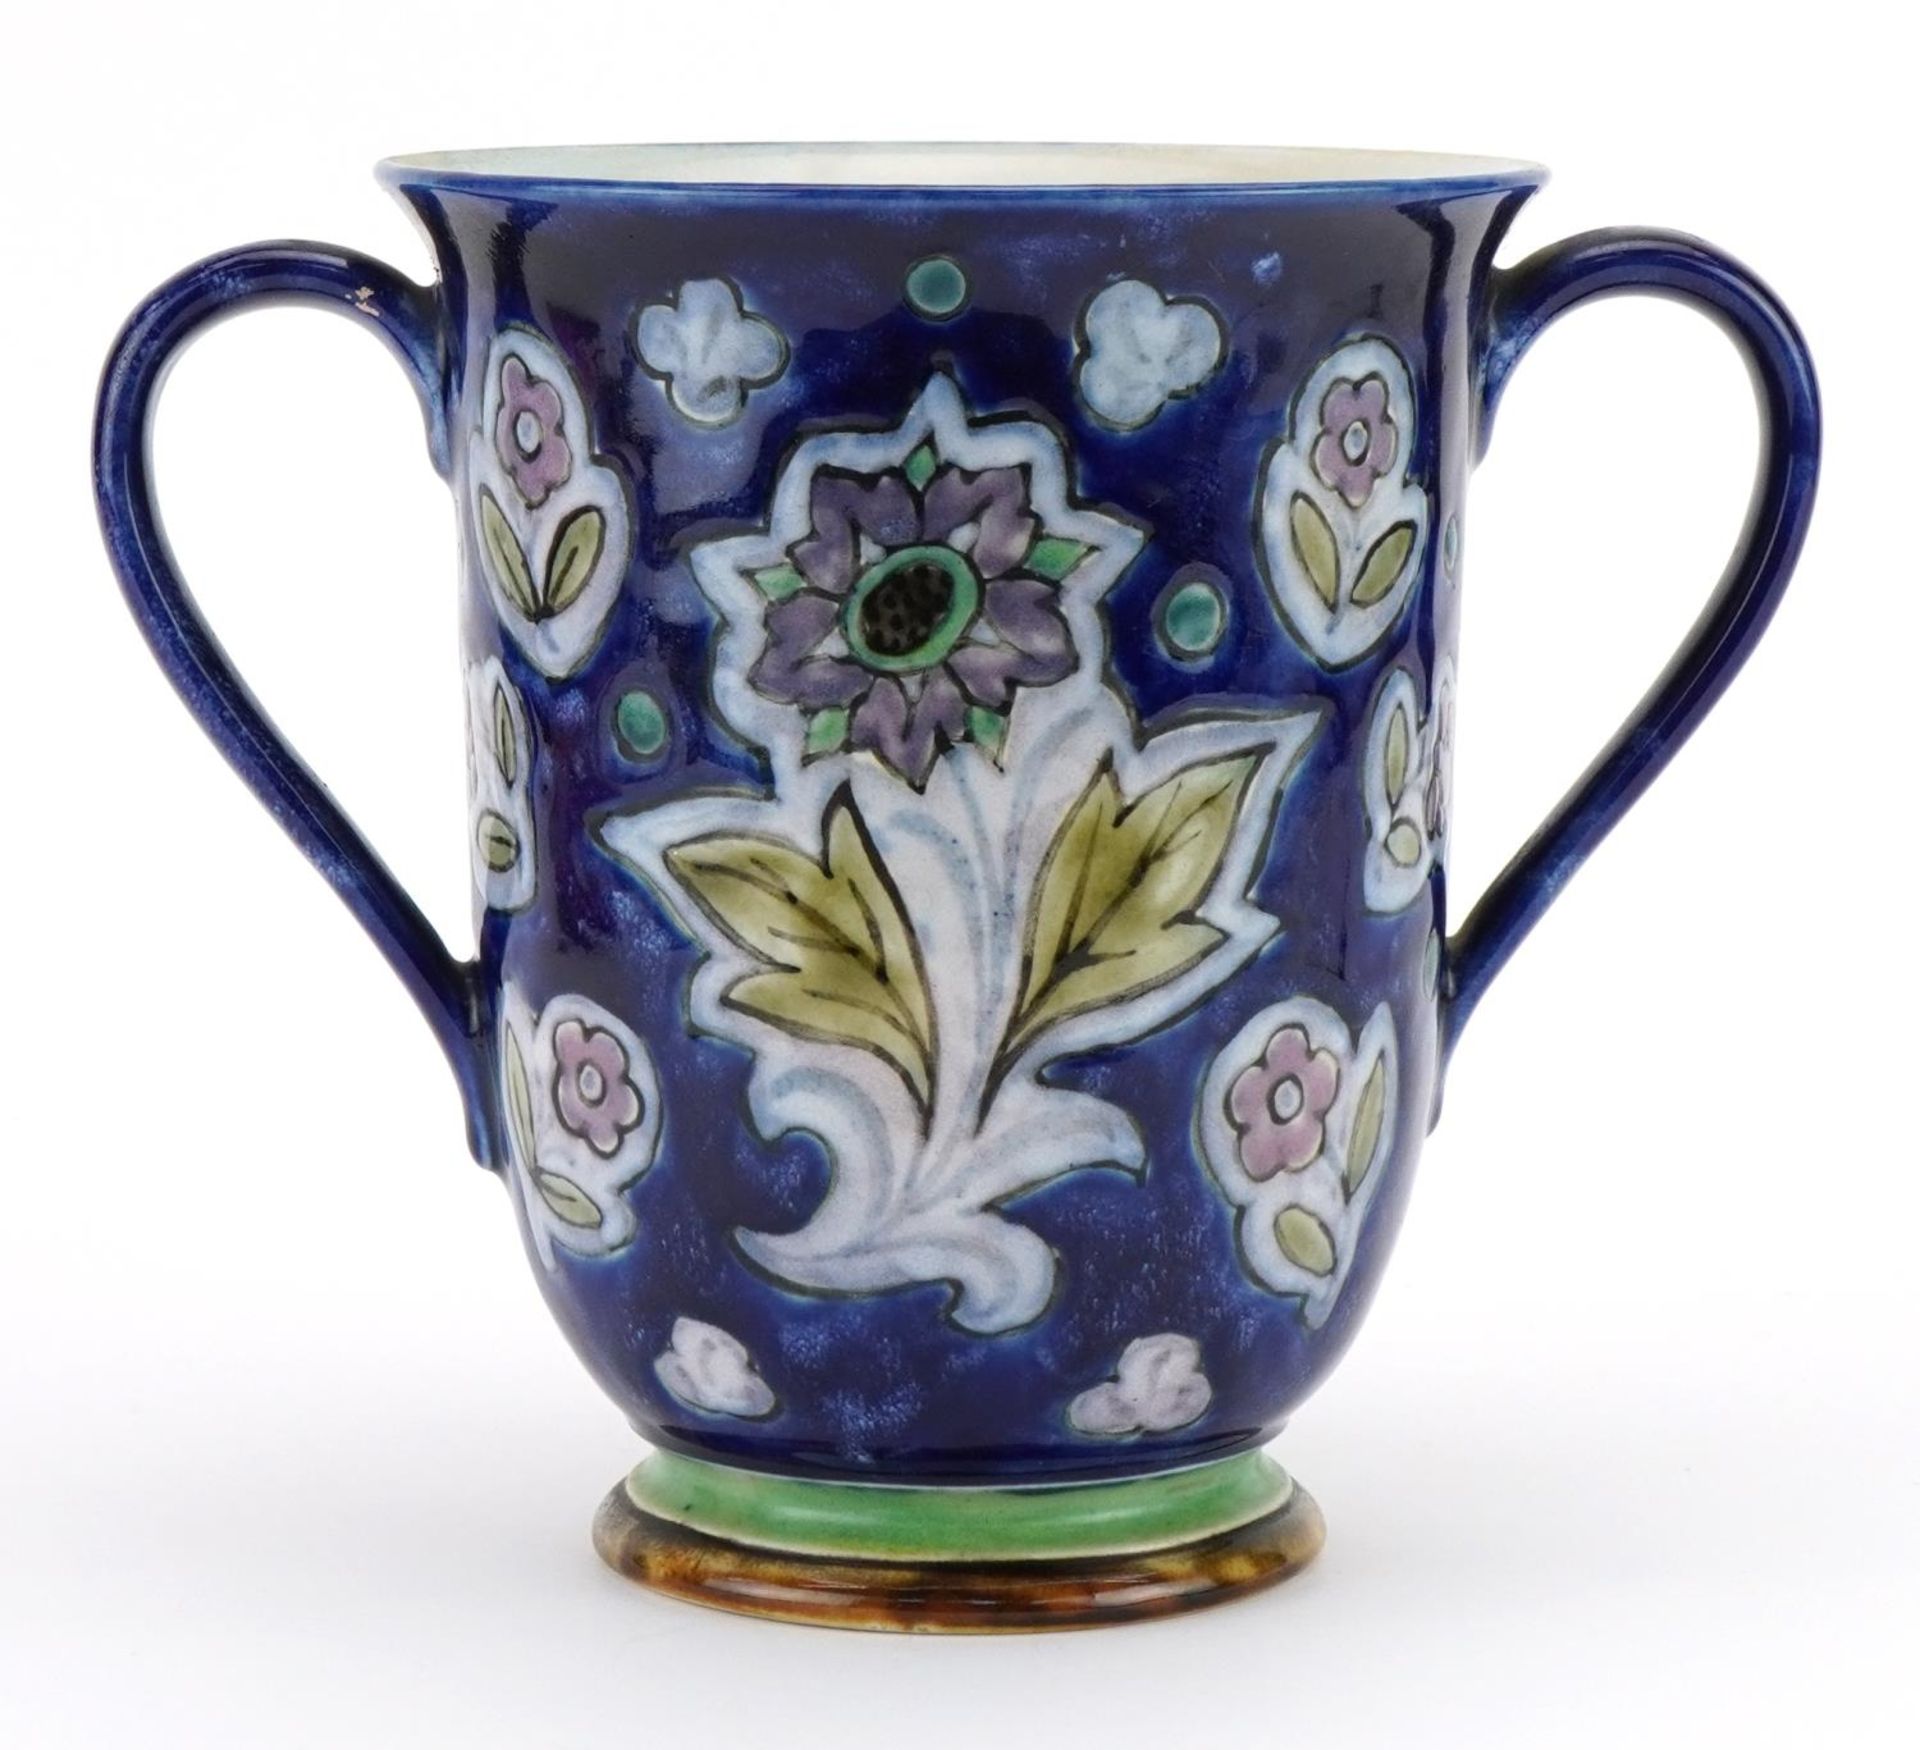 Doulton stoneware loving cup with twin handles hand painted with stylised flowers, 18.5cm high